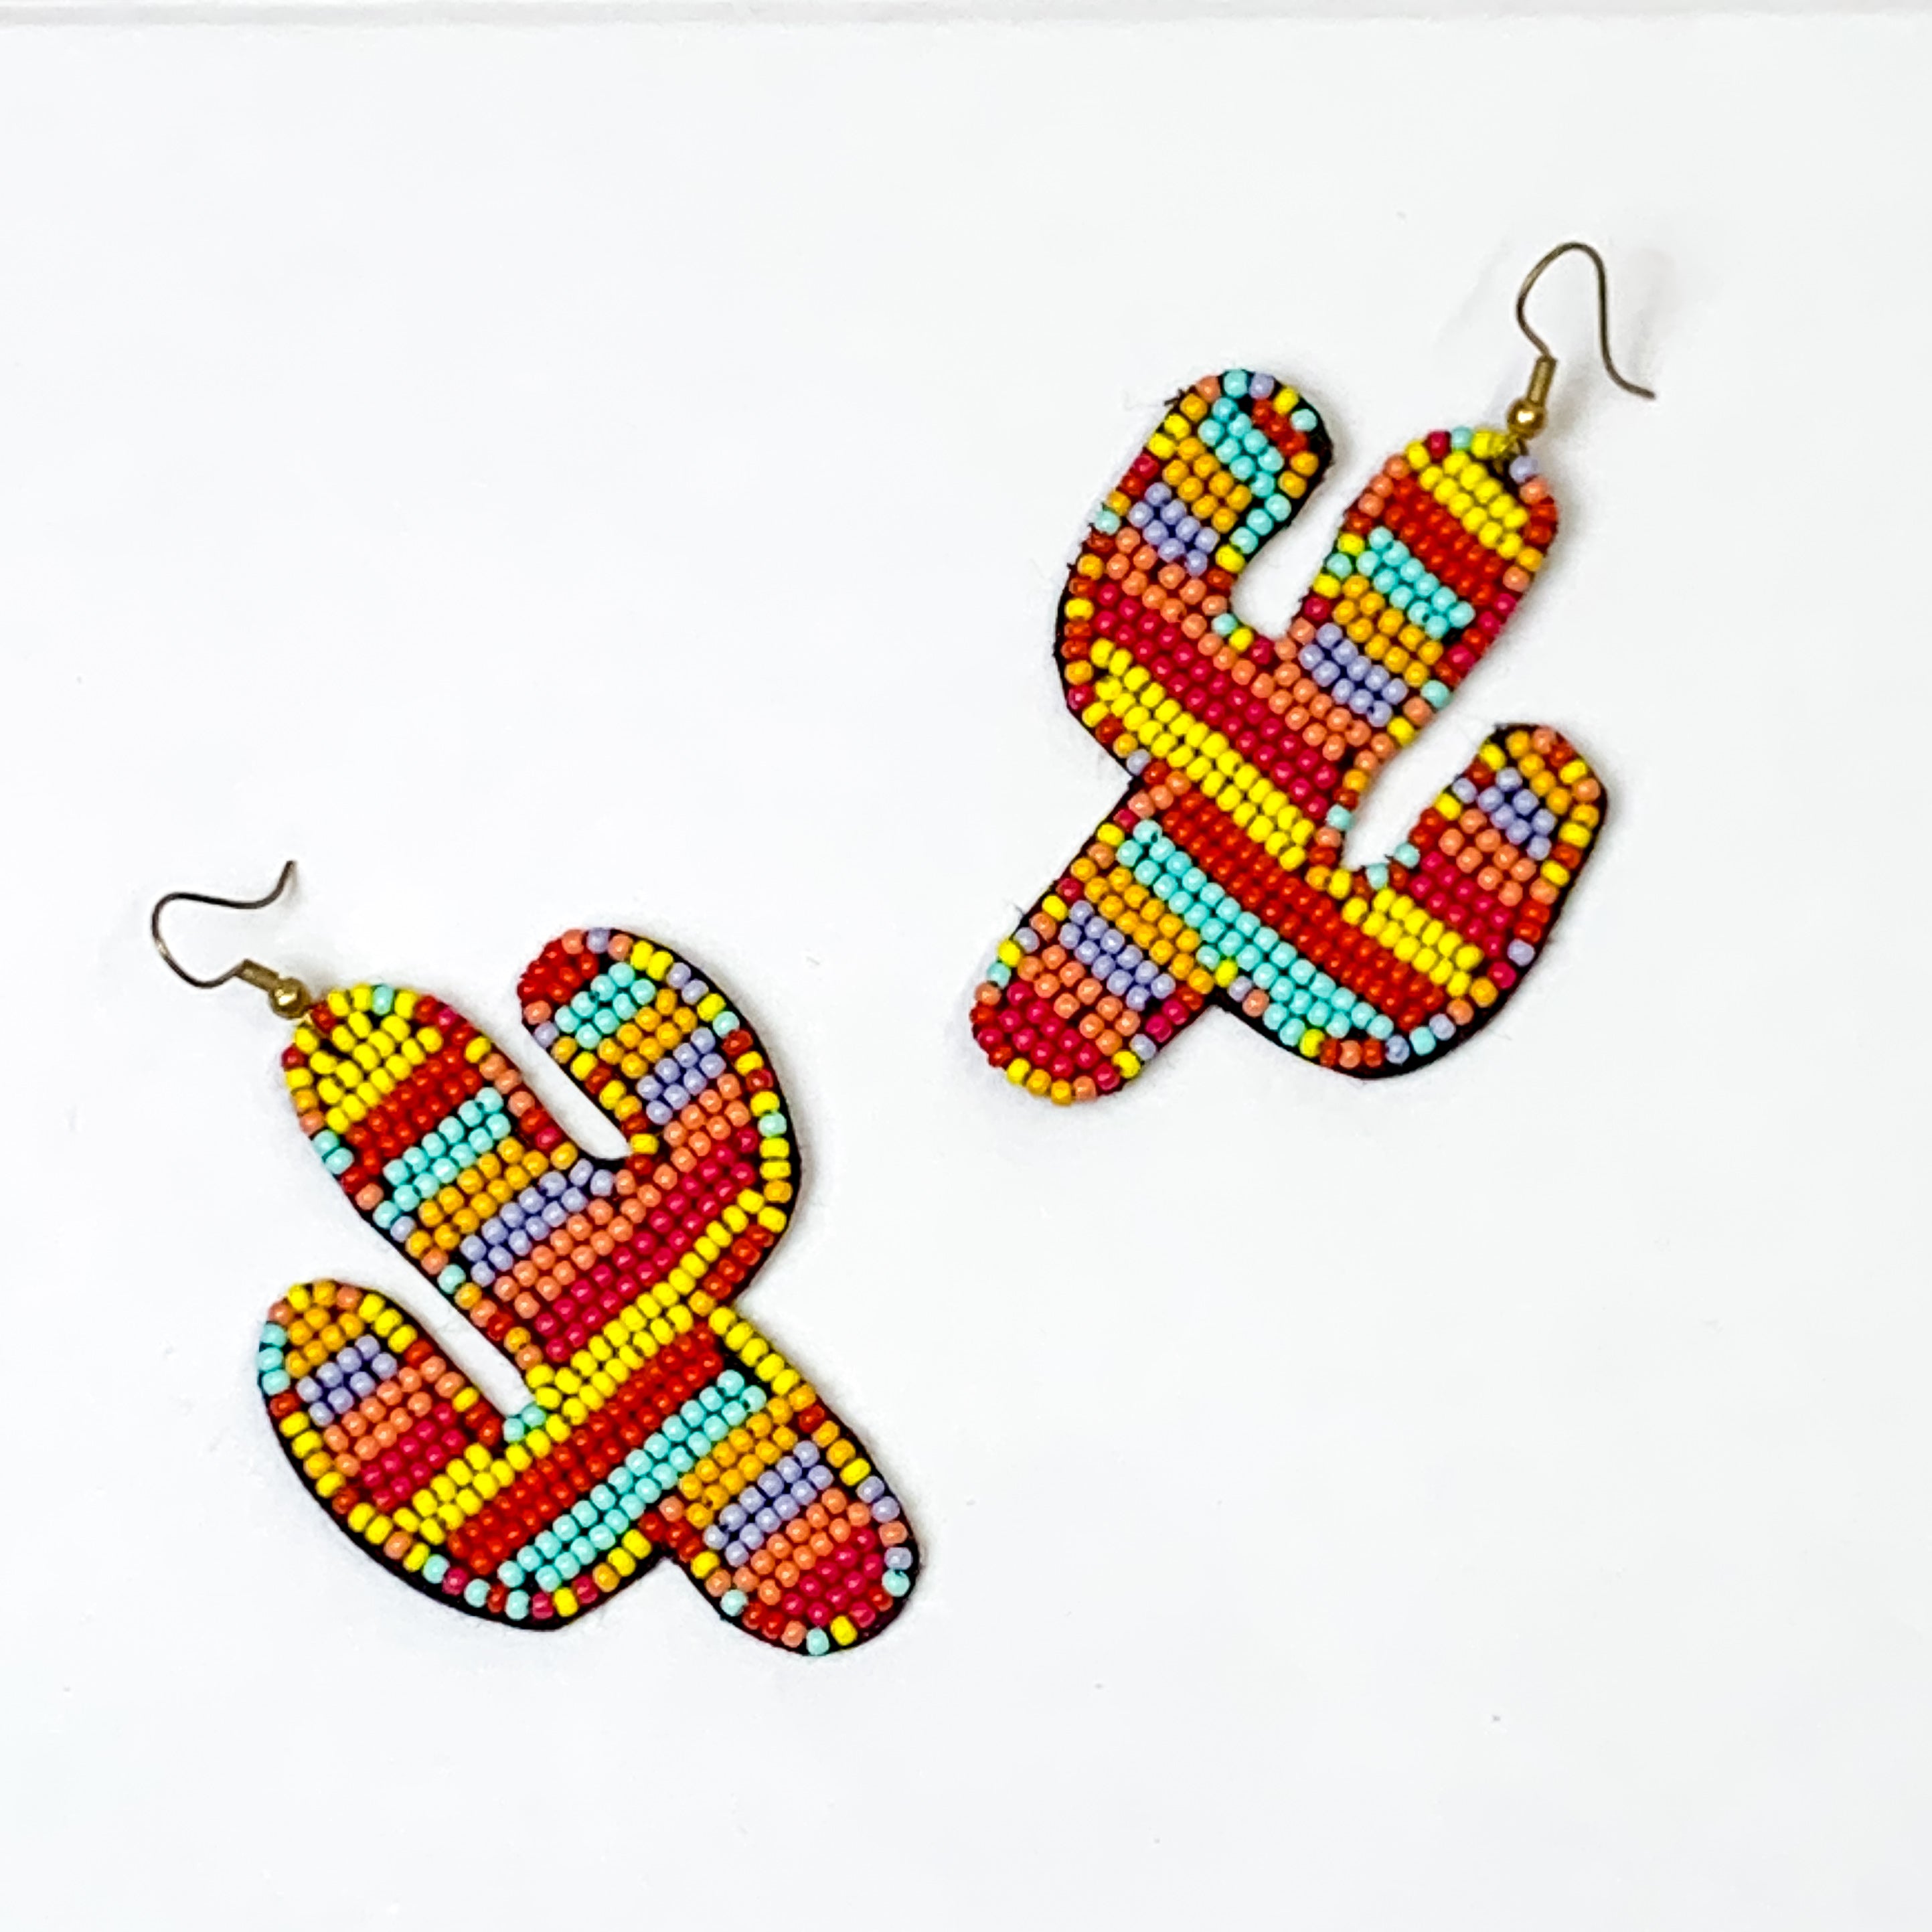 Seed Bead Cactus Statement Earrings in Red Multi - Giddy Up Glamour Boutique